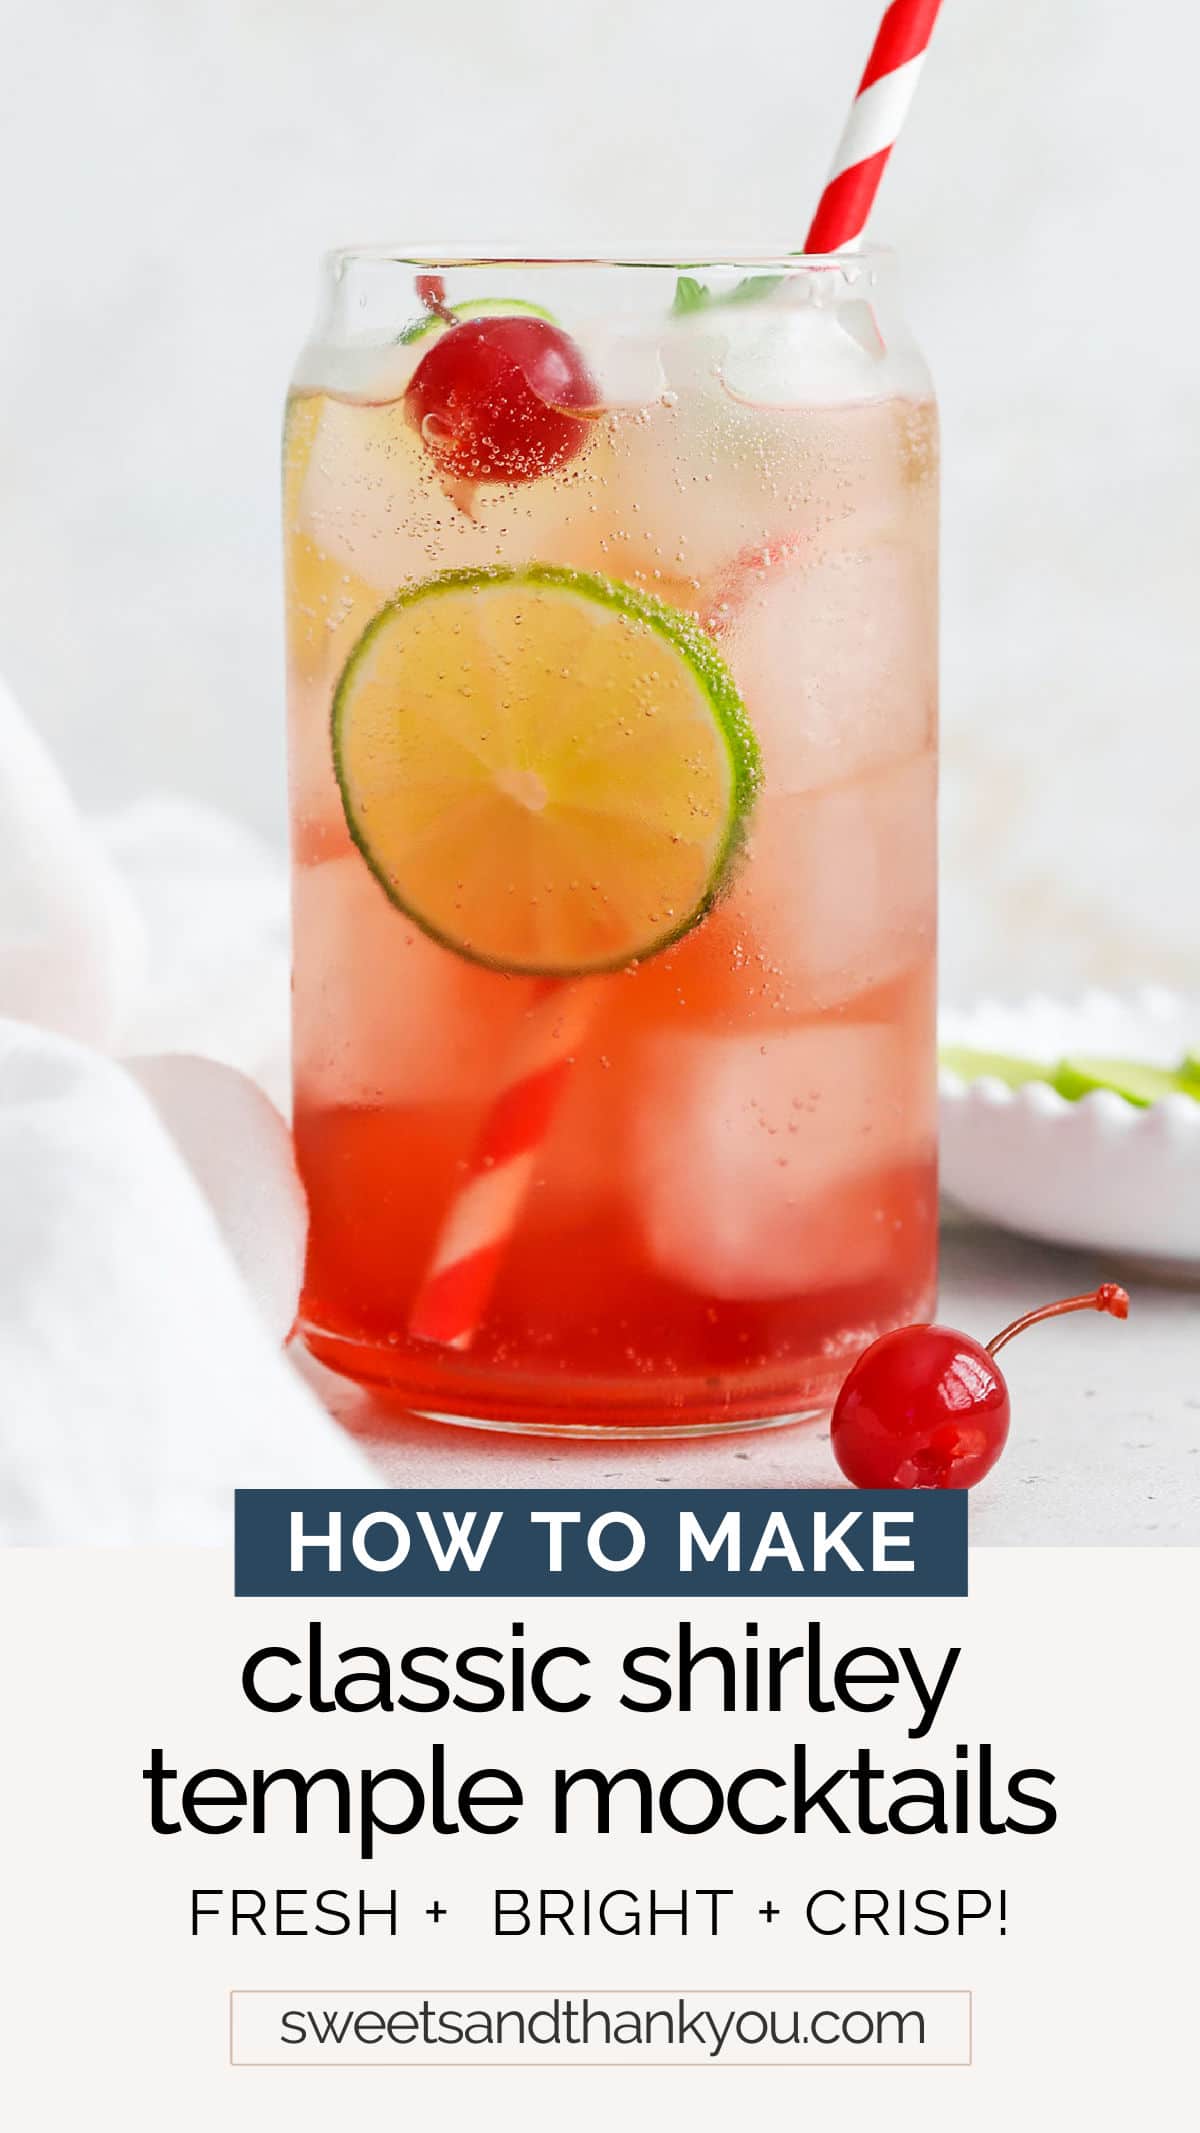 Classic Shirley Temple Drink - Learn how to make a Shirley Temple mocktail with this easy recipe. It's kid-friendly, non-alcoholic & fun! // Shirley temple mocktail // Shirley temple ingredients // Shirley temple cocktail // Shirley temple drink recipe // kids drinks // kids cocktail // mocktail recipe // homemade Shirley temple mocktail // Sweets & Thank You Shirley Temple // kids mocktail // classic mocktail recipe // popular mocktail recipe